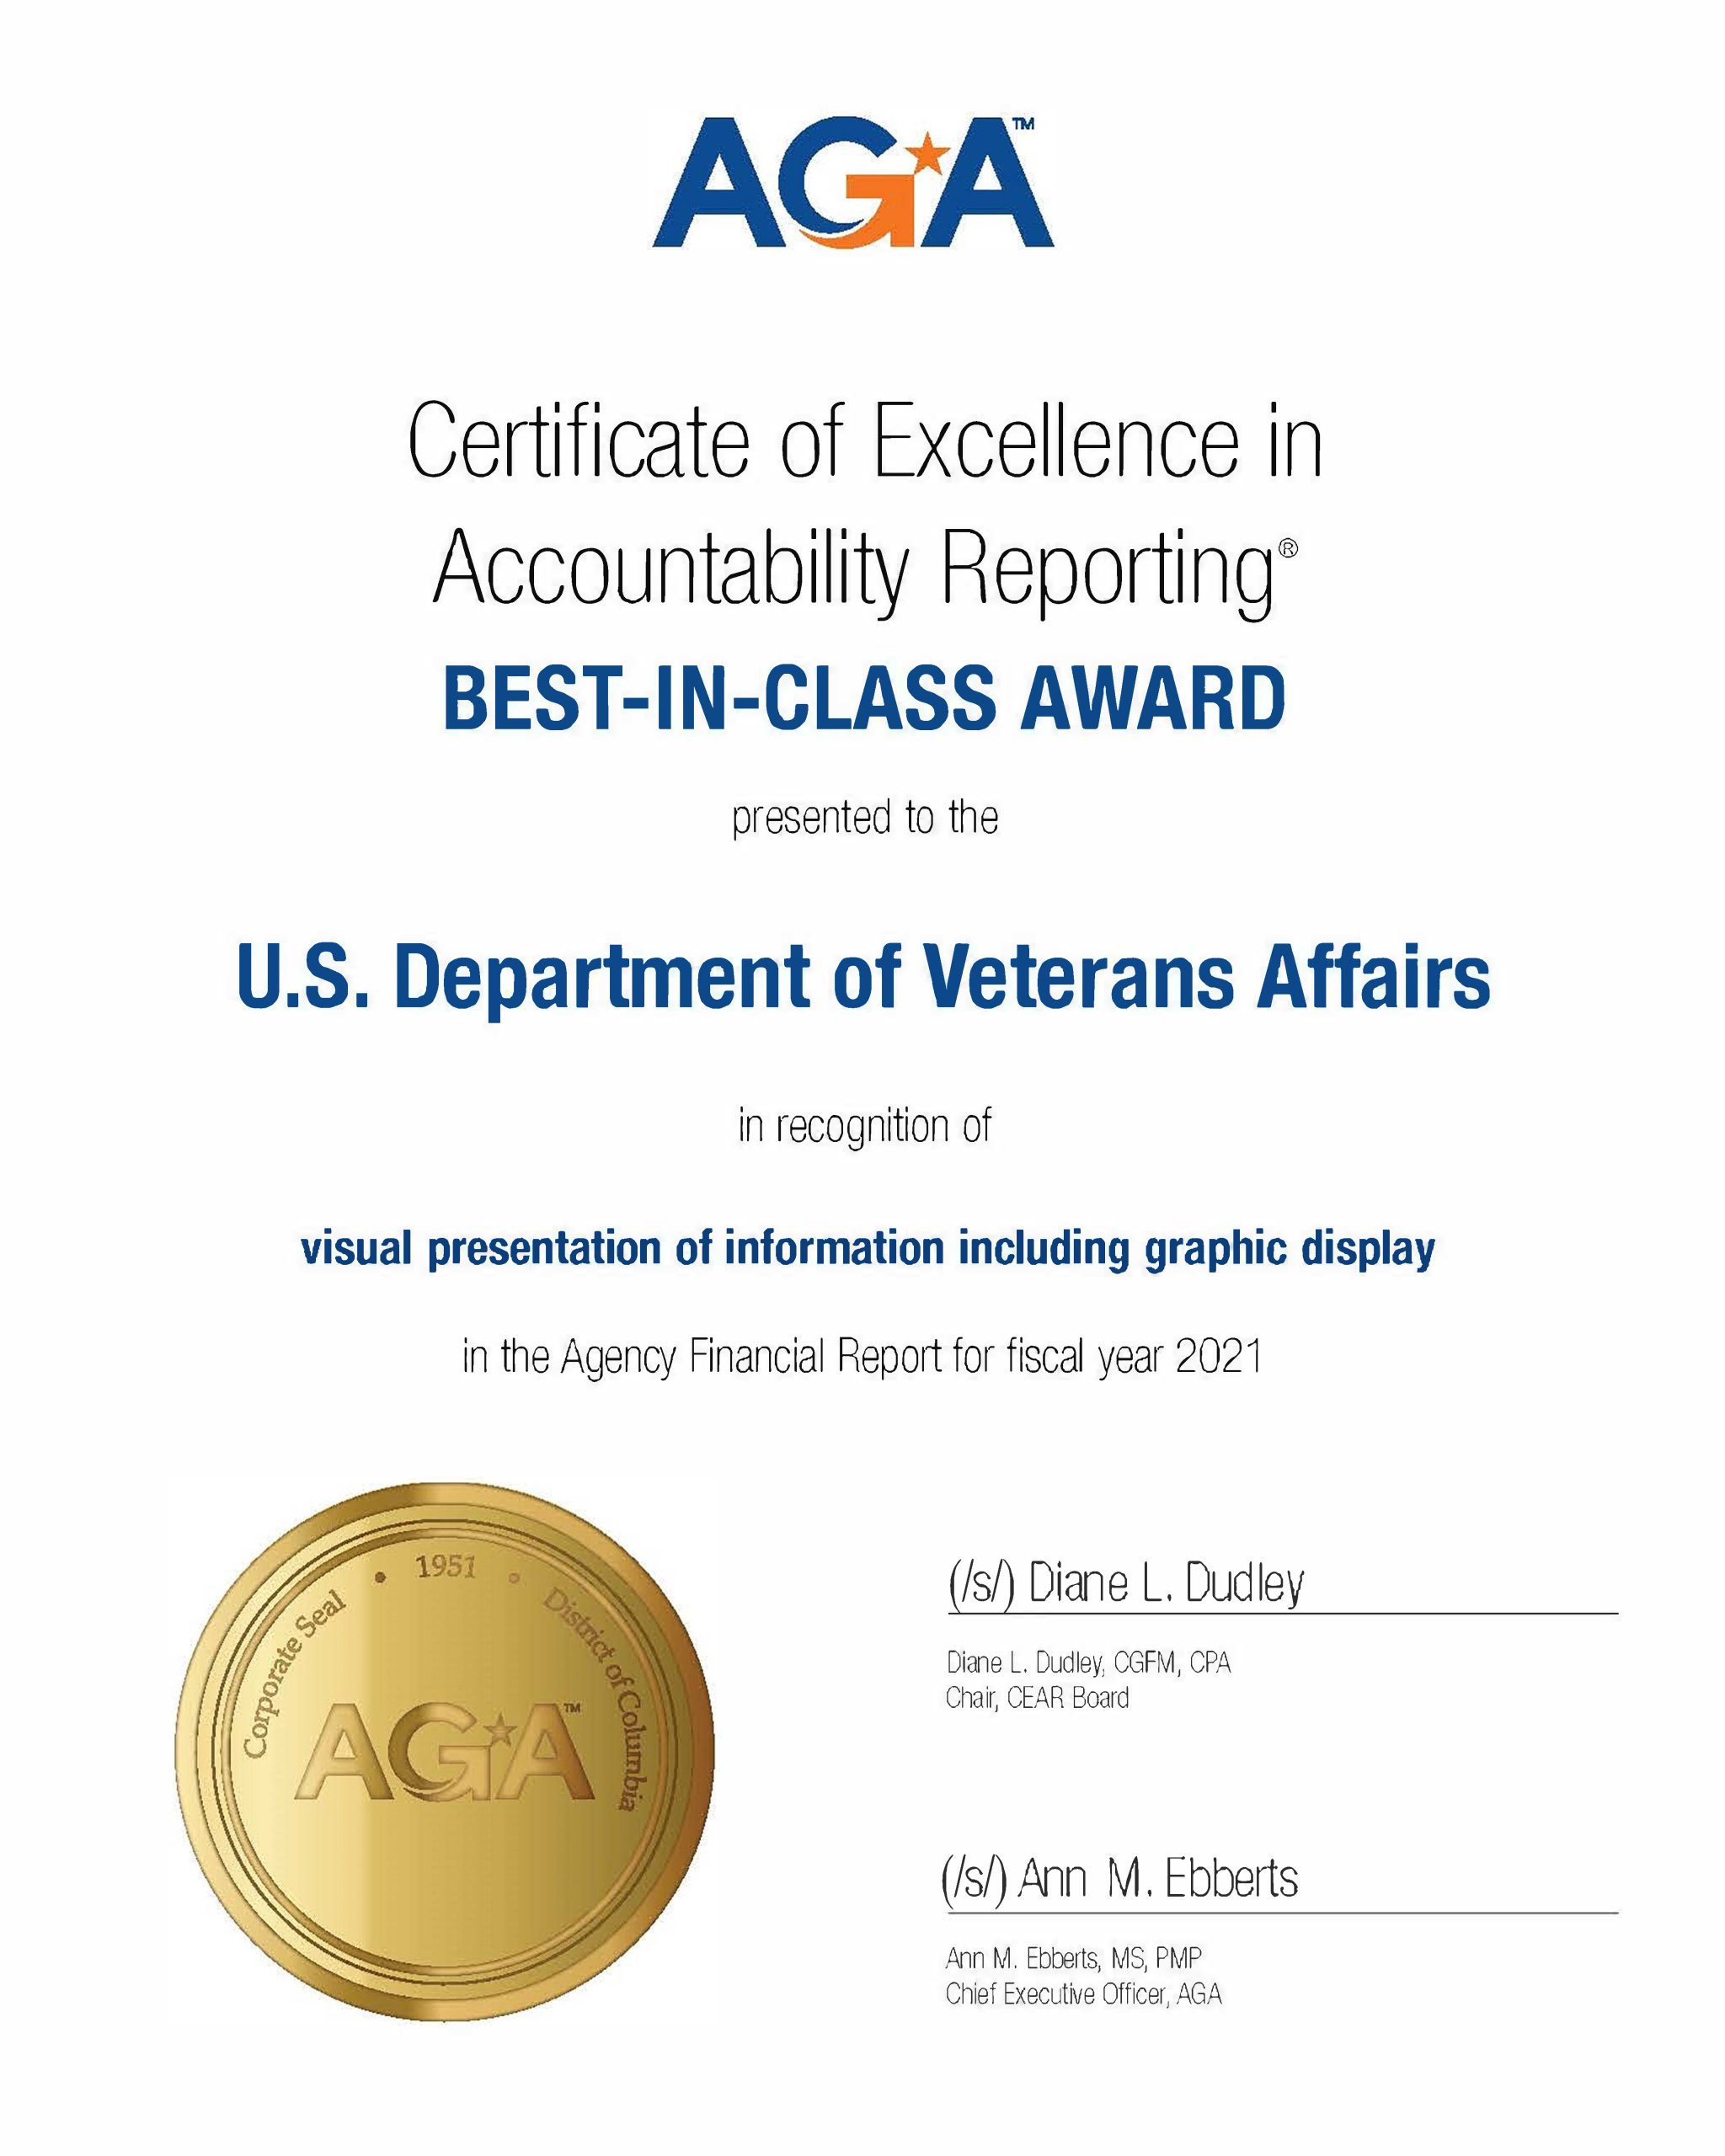 AGA Certificate of Excellence in Accountability Reporting Best in Class Award presented to the U.S. Department of Veterans Affairs in recognition of visual presentation of information including graphic display in the Agency Financial Report for fiscal year 2021